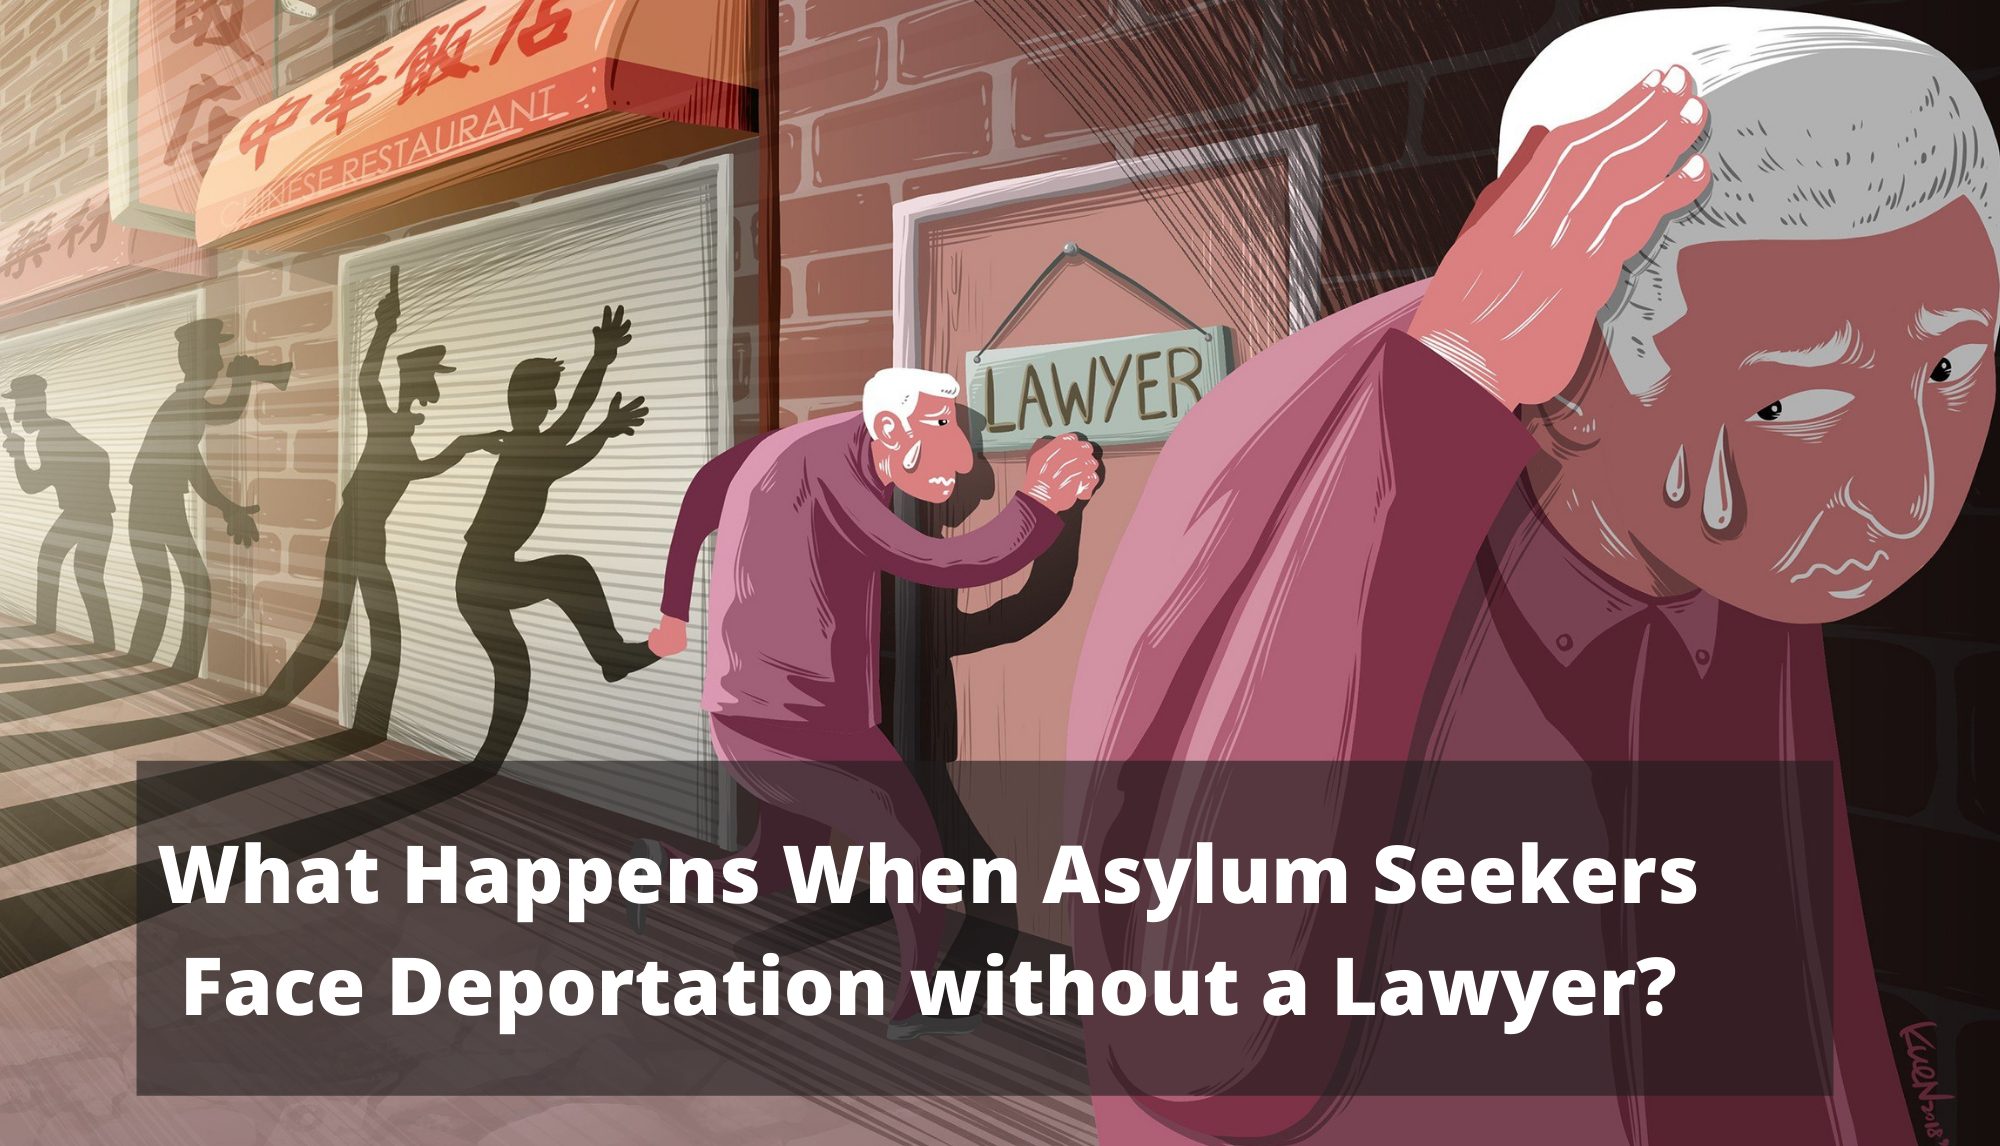 What Happens When Asylum Seekers Face Deportation without a Lawyer?